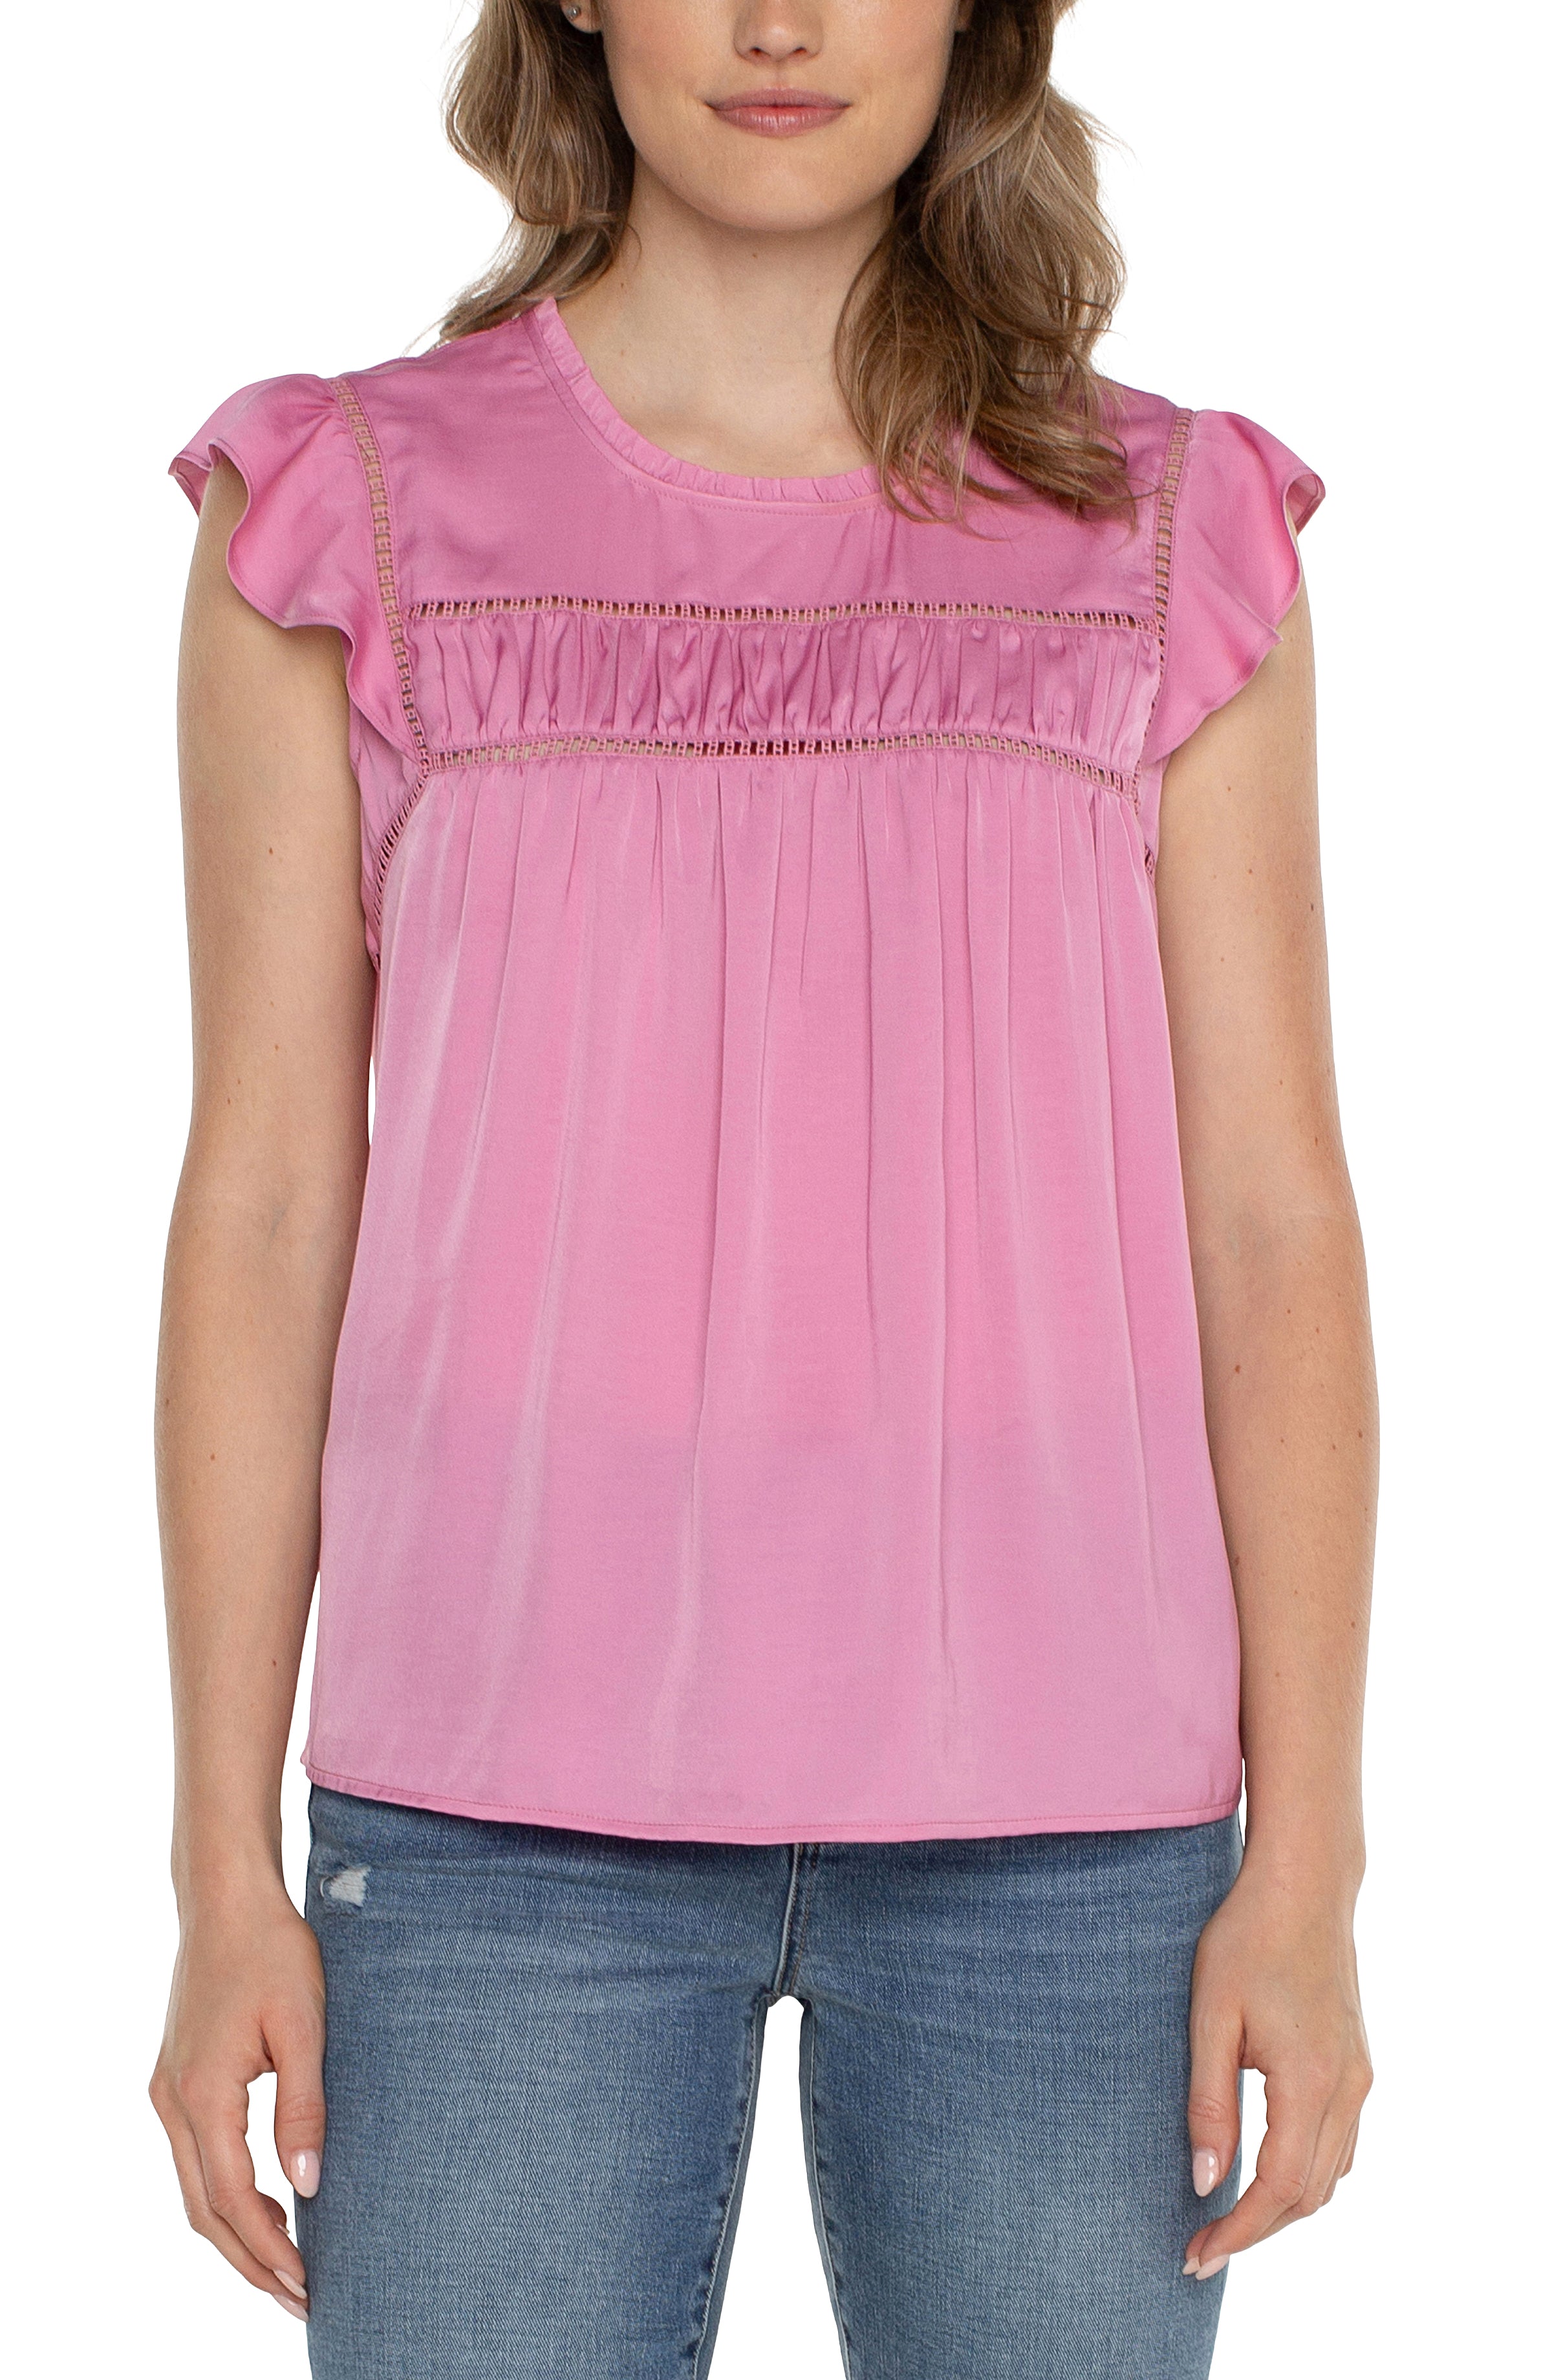 LVP Flutter Sleeve Woven Top - Rose Pink Front View